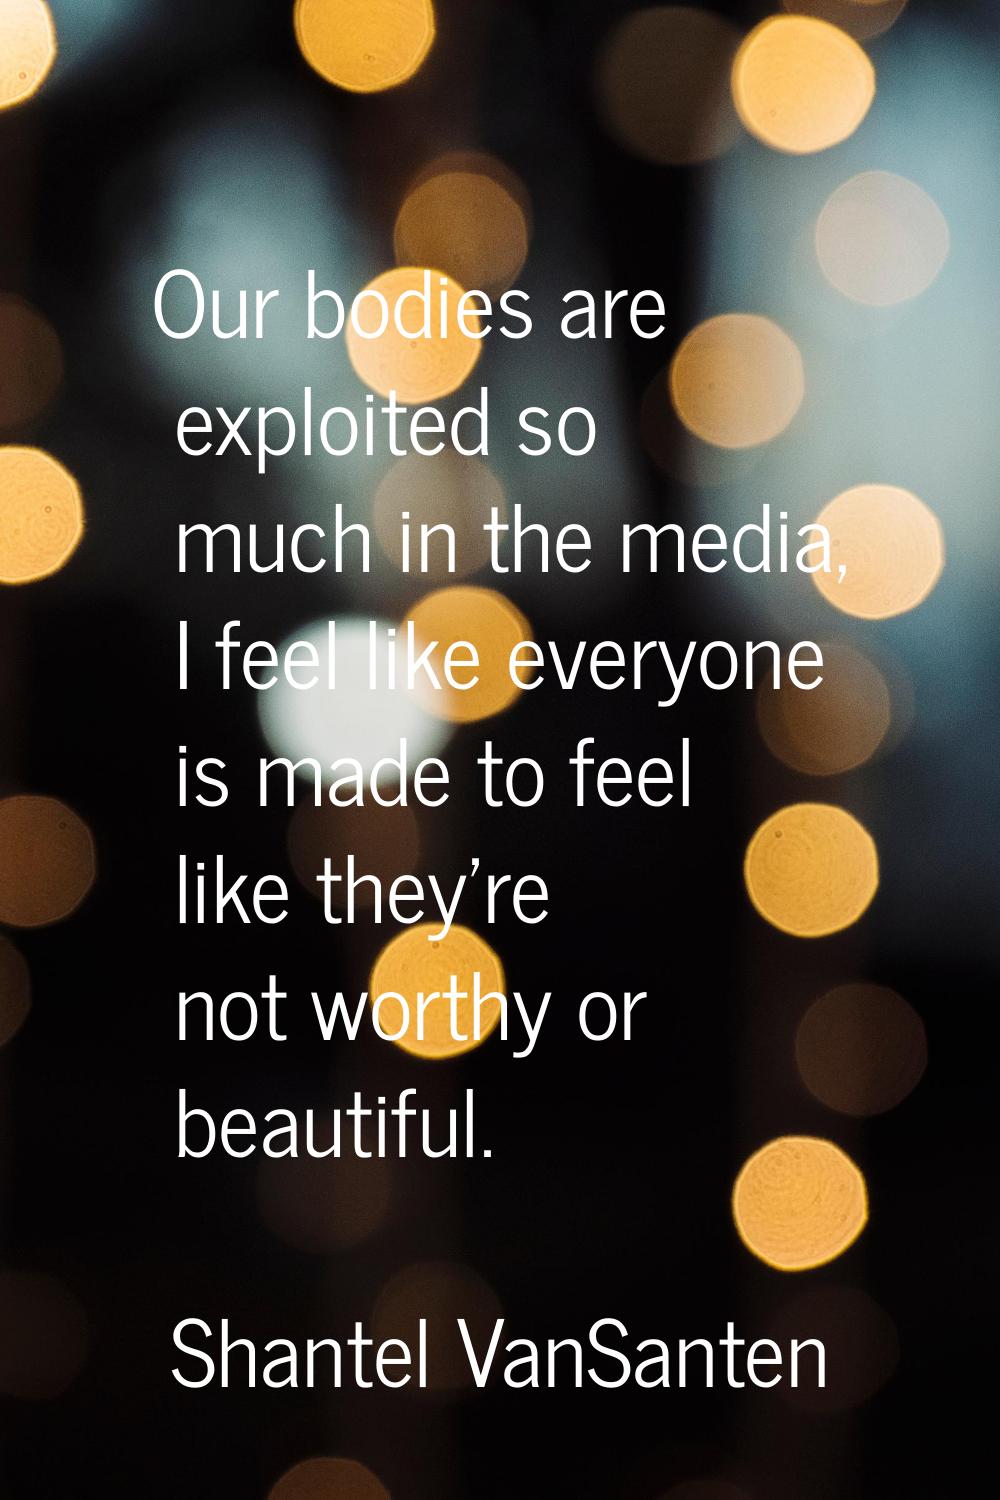 Our bodies are exploited so much in the media, I feel like everyone is made to feel like they're no